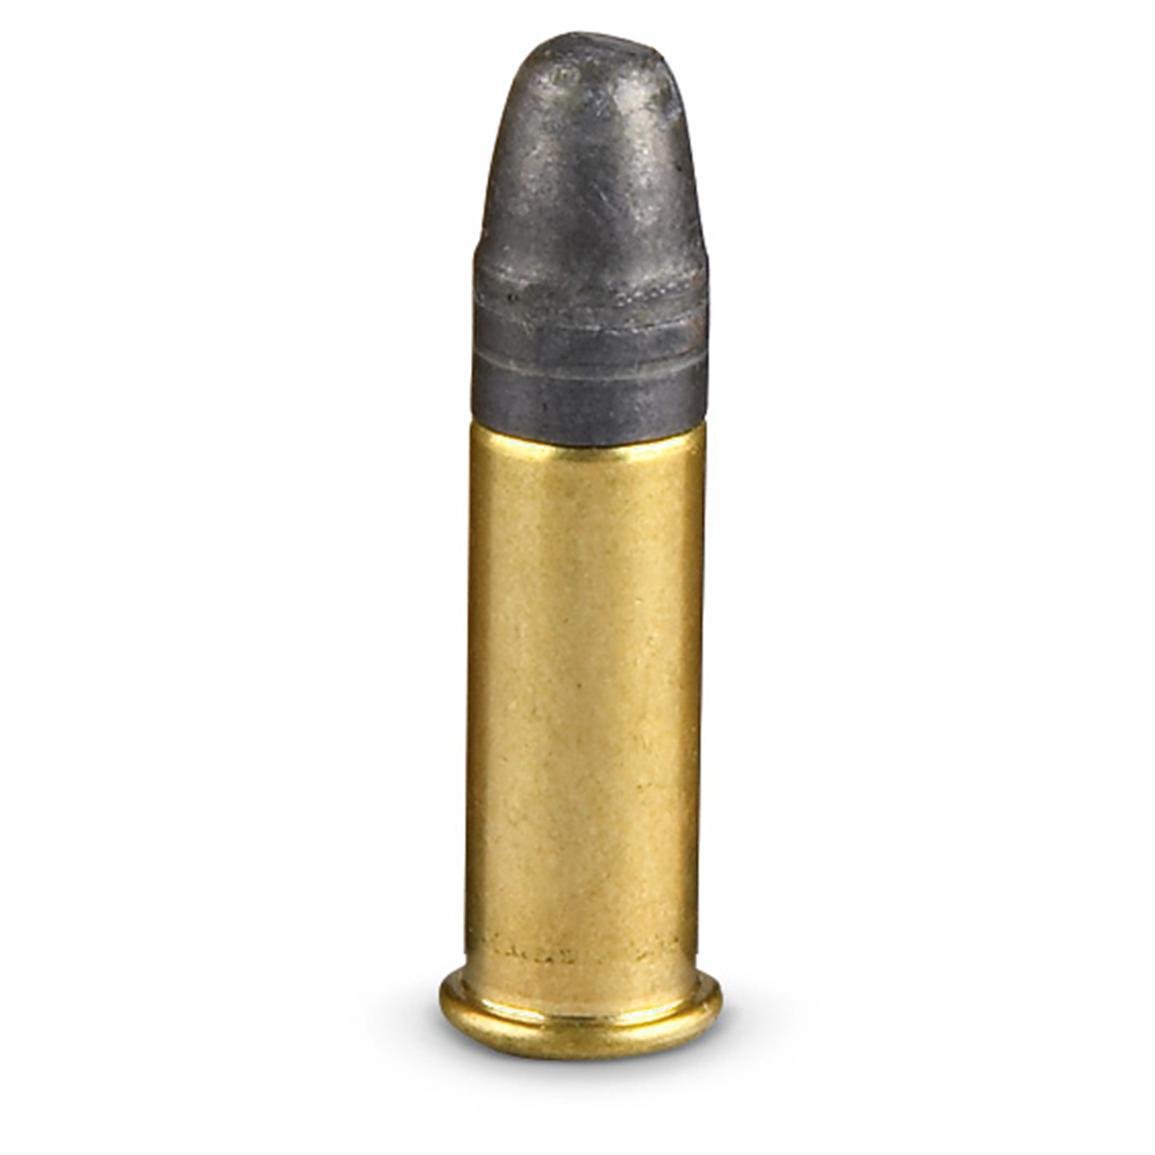 Folllow us for up to the minute 22 LR Ammo Sightings!